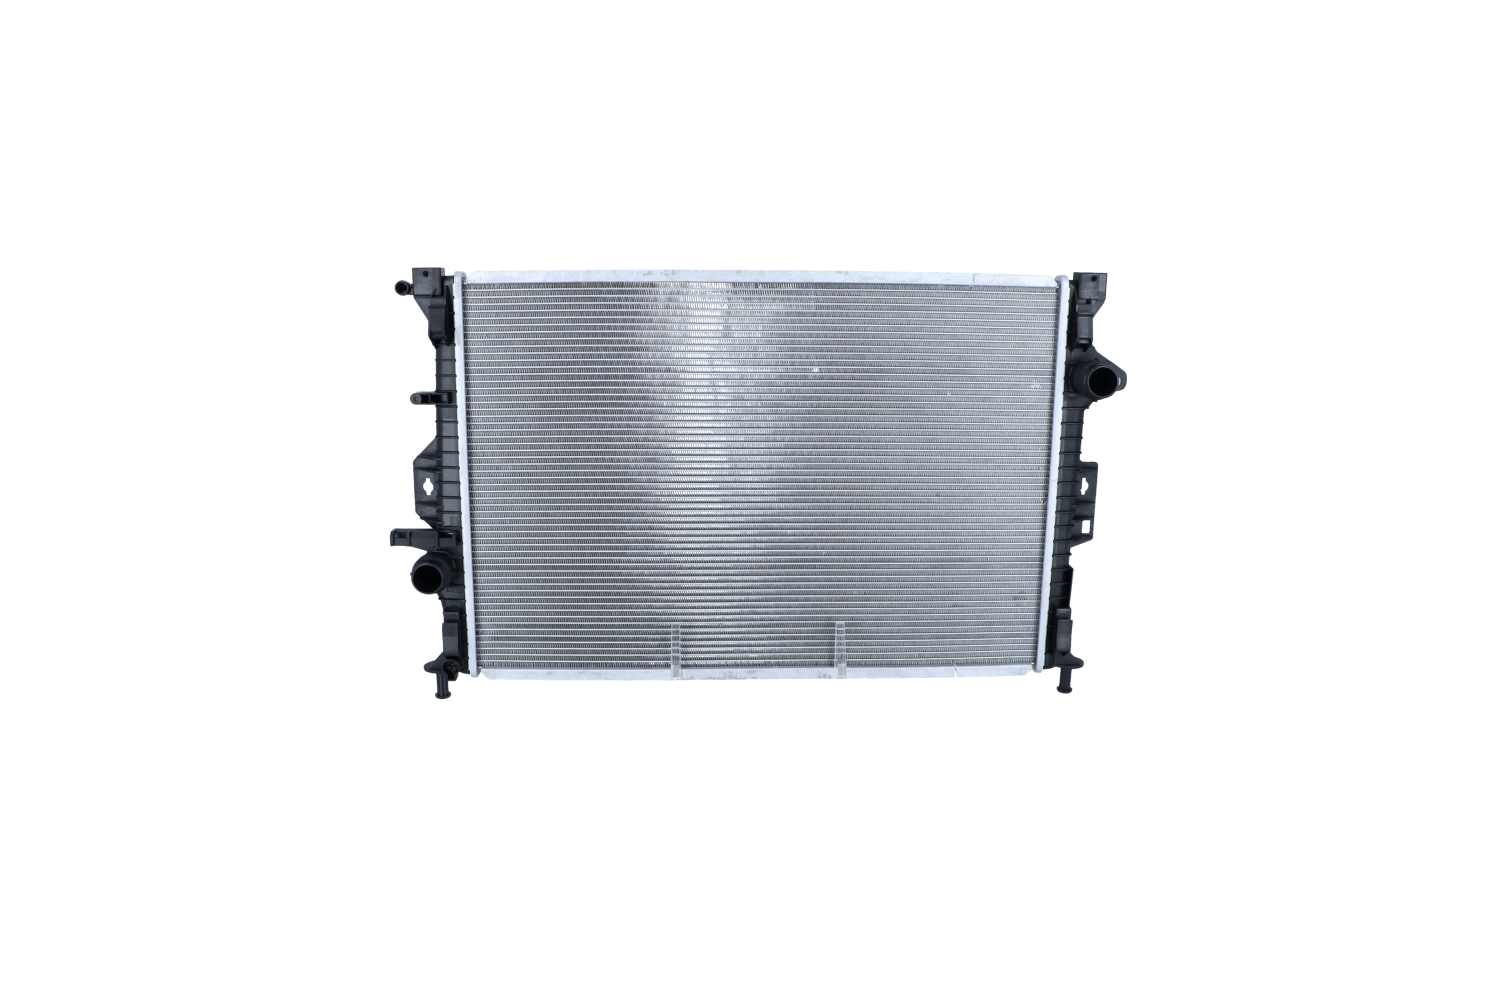 NRF EASY FIT 53737 Engine radiator Aluminium, 672 x 461 x 27 mm, with seal ring, Brazed cooling fins